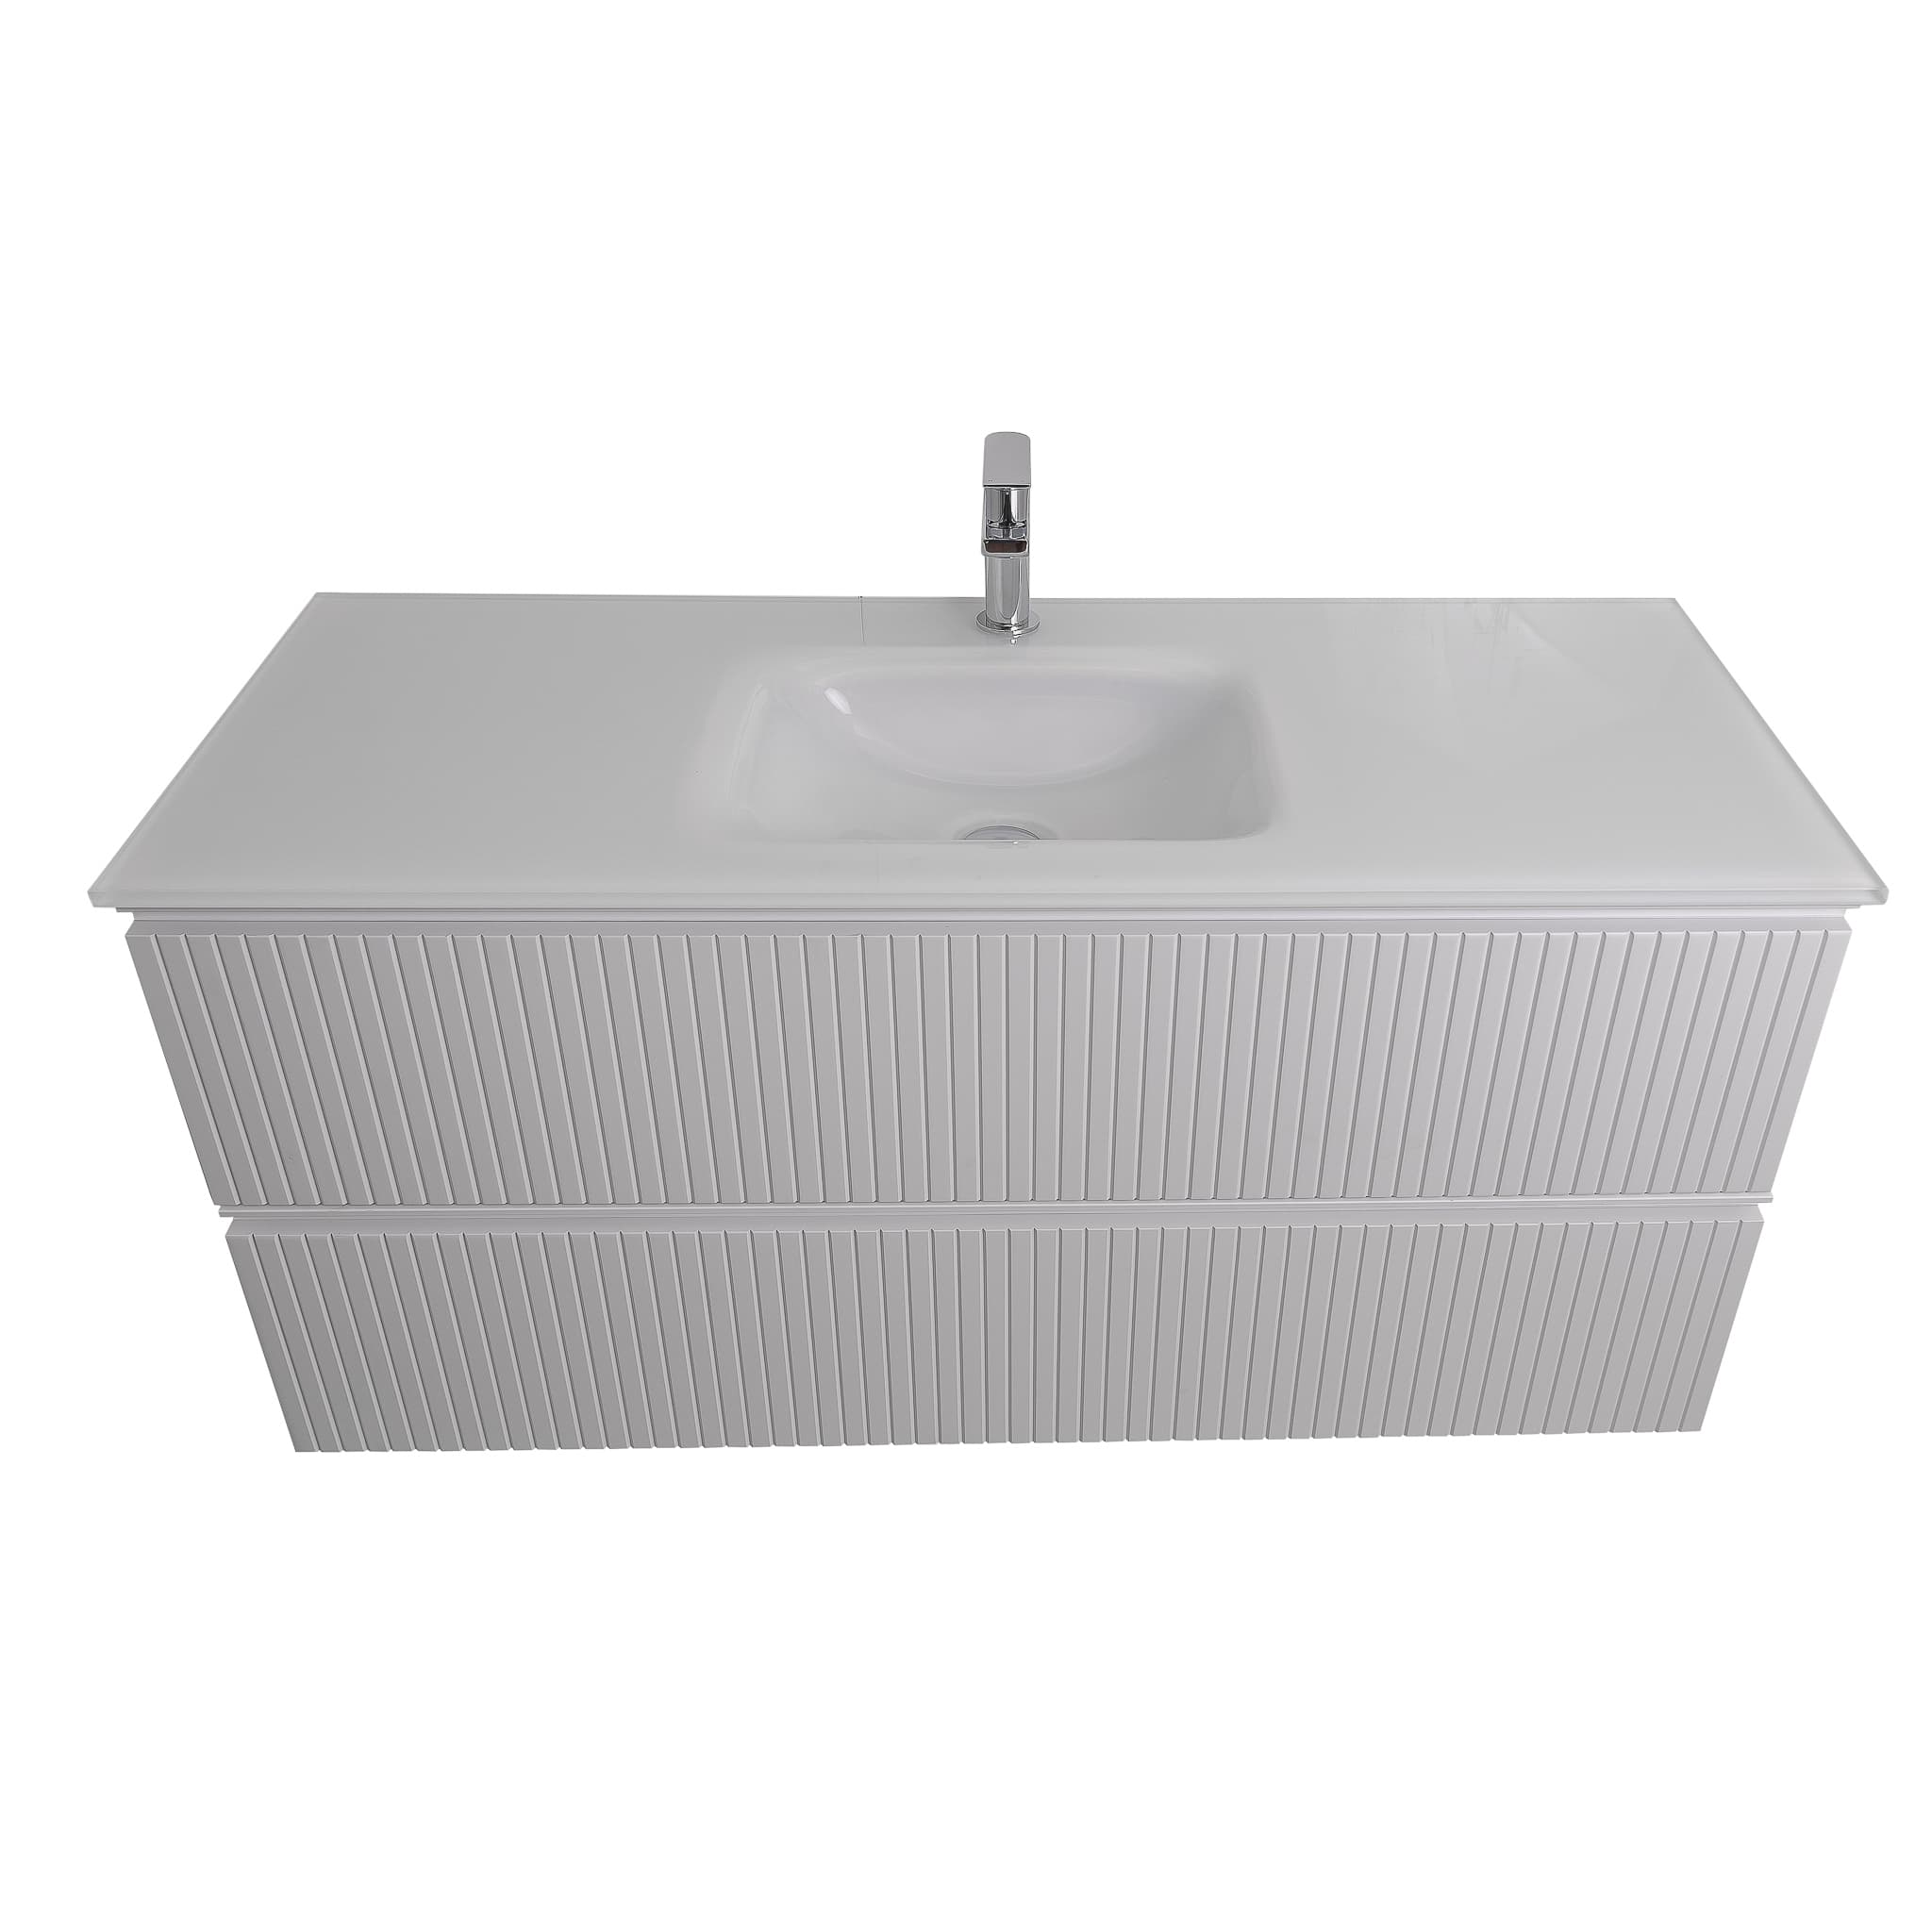 Ares 47.5 Matte White Cabinet, White Tempered Glass Sink, Wall Mounted Modern Vanity Set